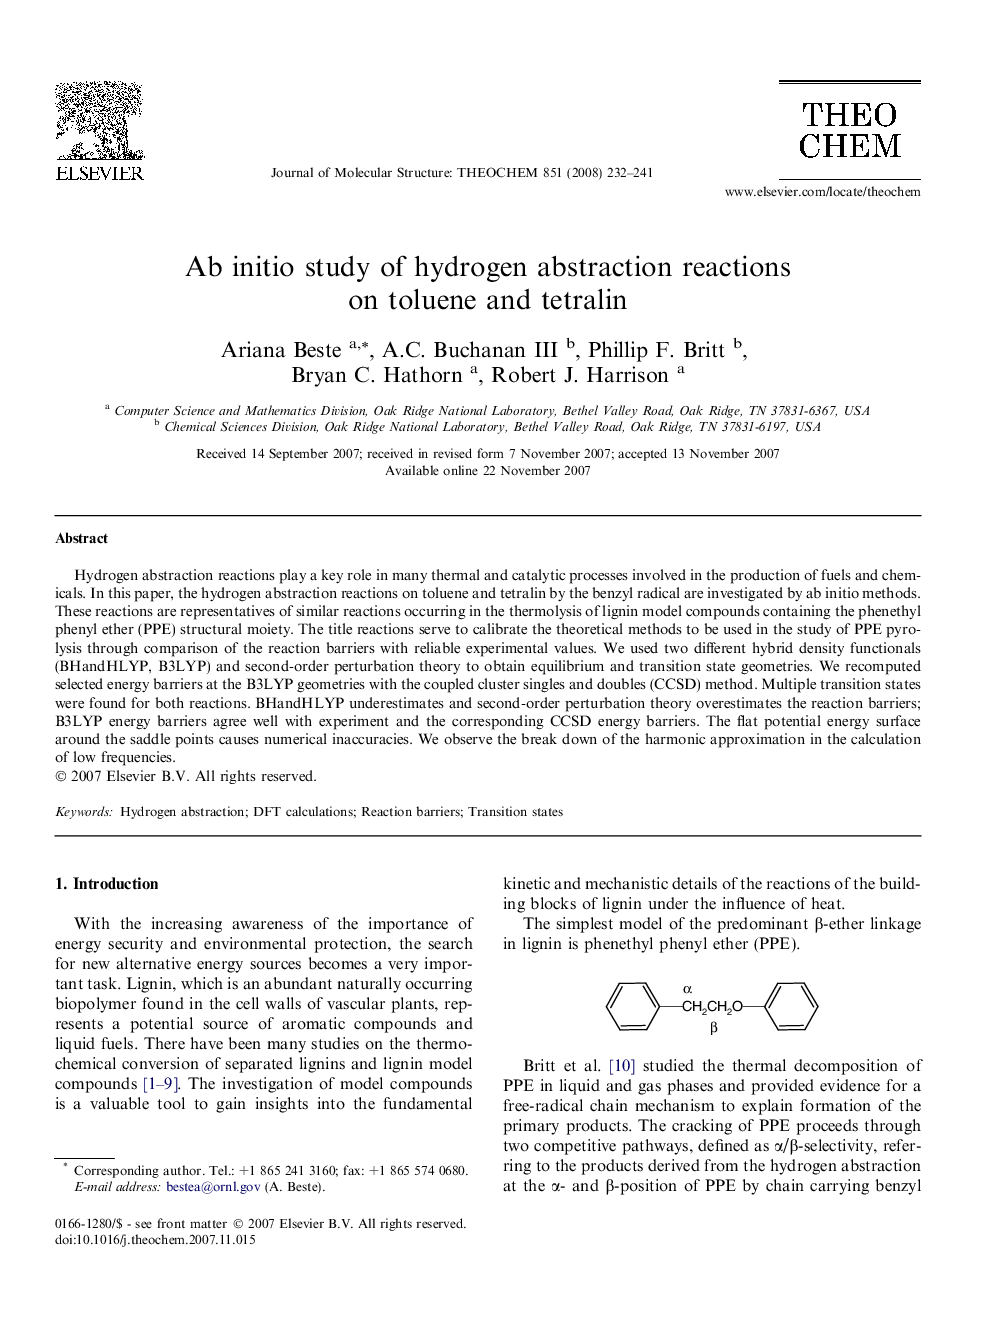 Ab initio study of hydrogen abstraction reactions on toluene and tetralin